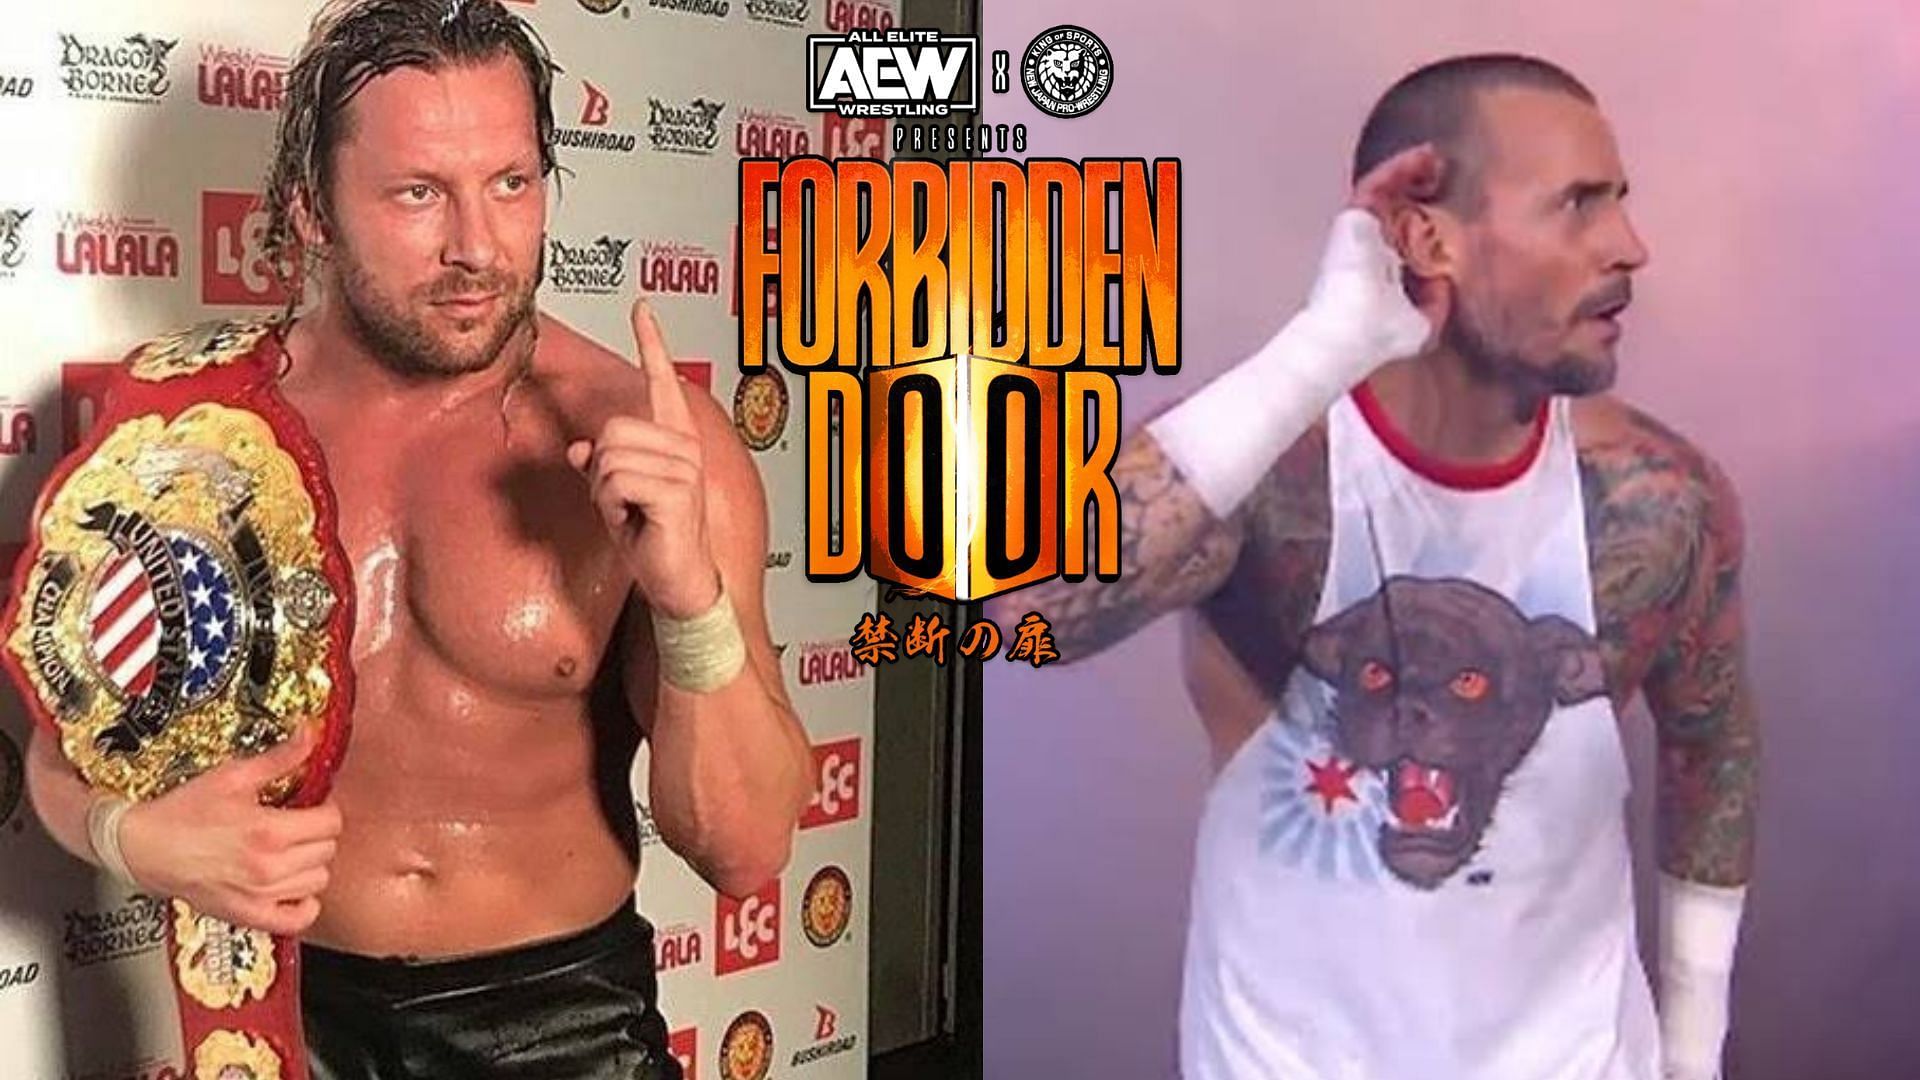 Winning streak comes to an end; CM Punk turns his back on fans? — 5 Things AEW shouldn’t do at Forbidden Door 2023